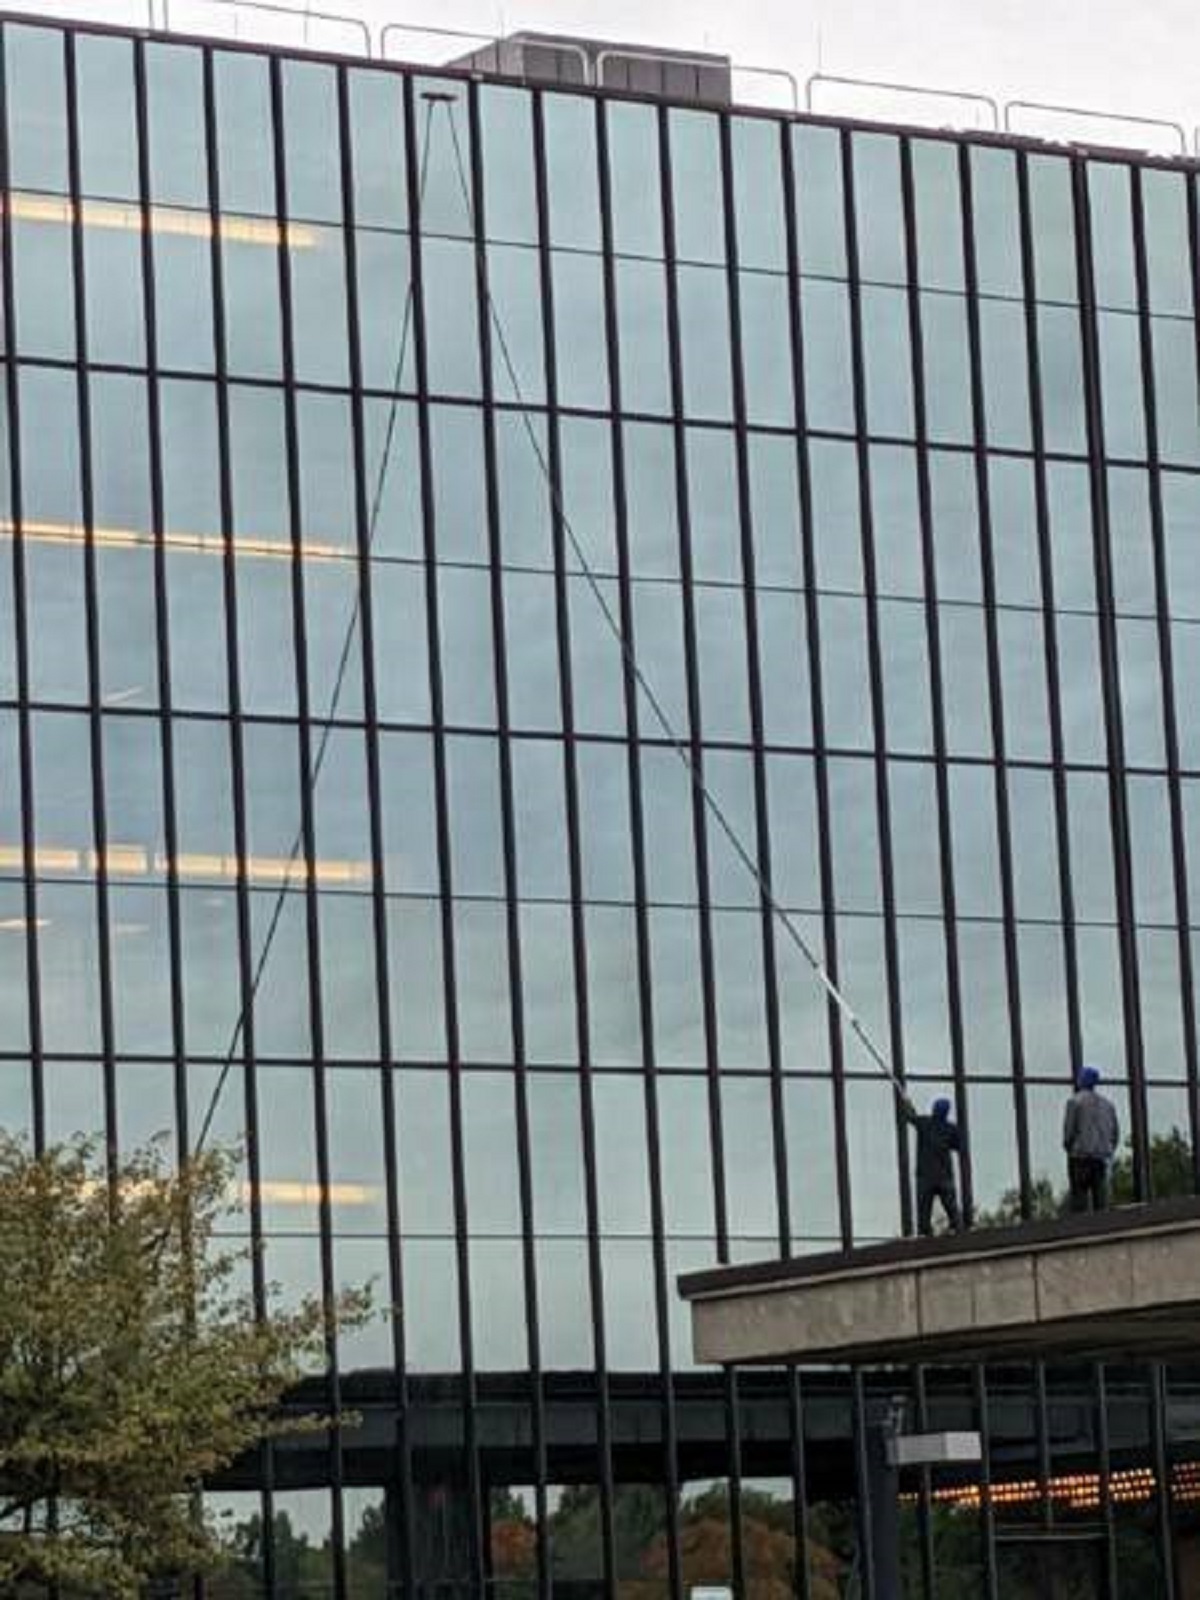 "The way they're cleaning an all glass window building"